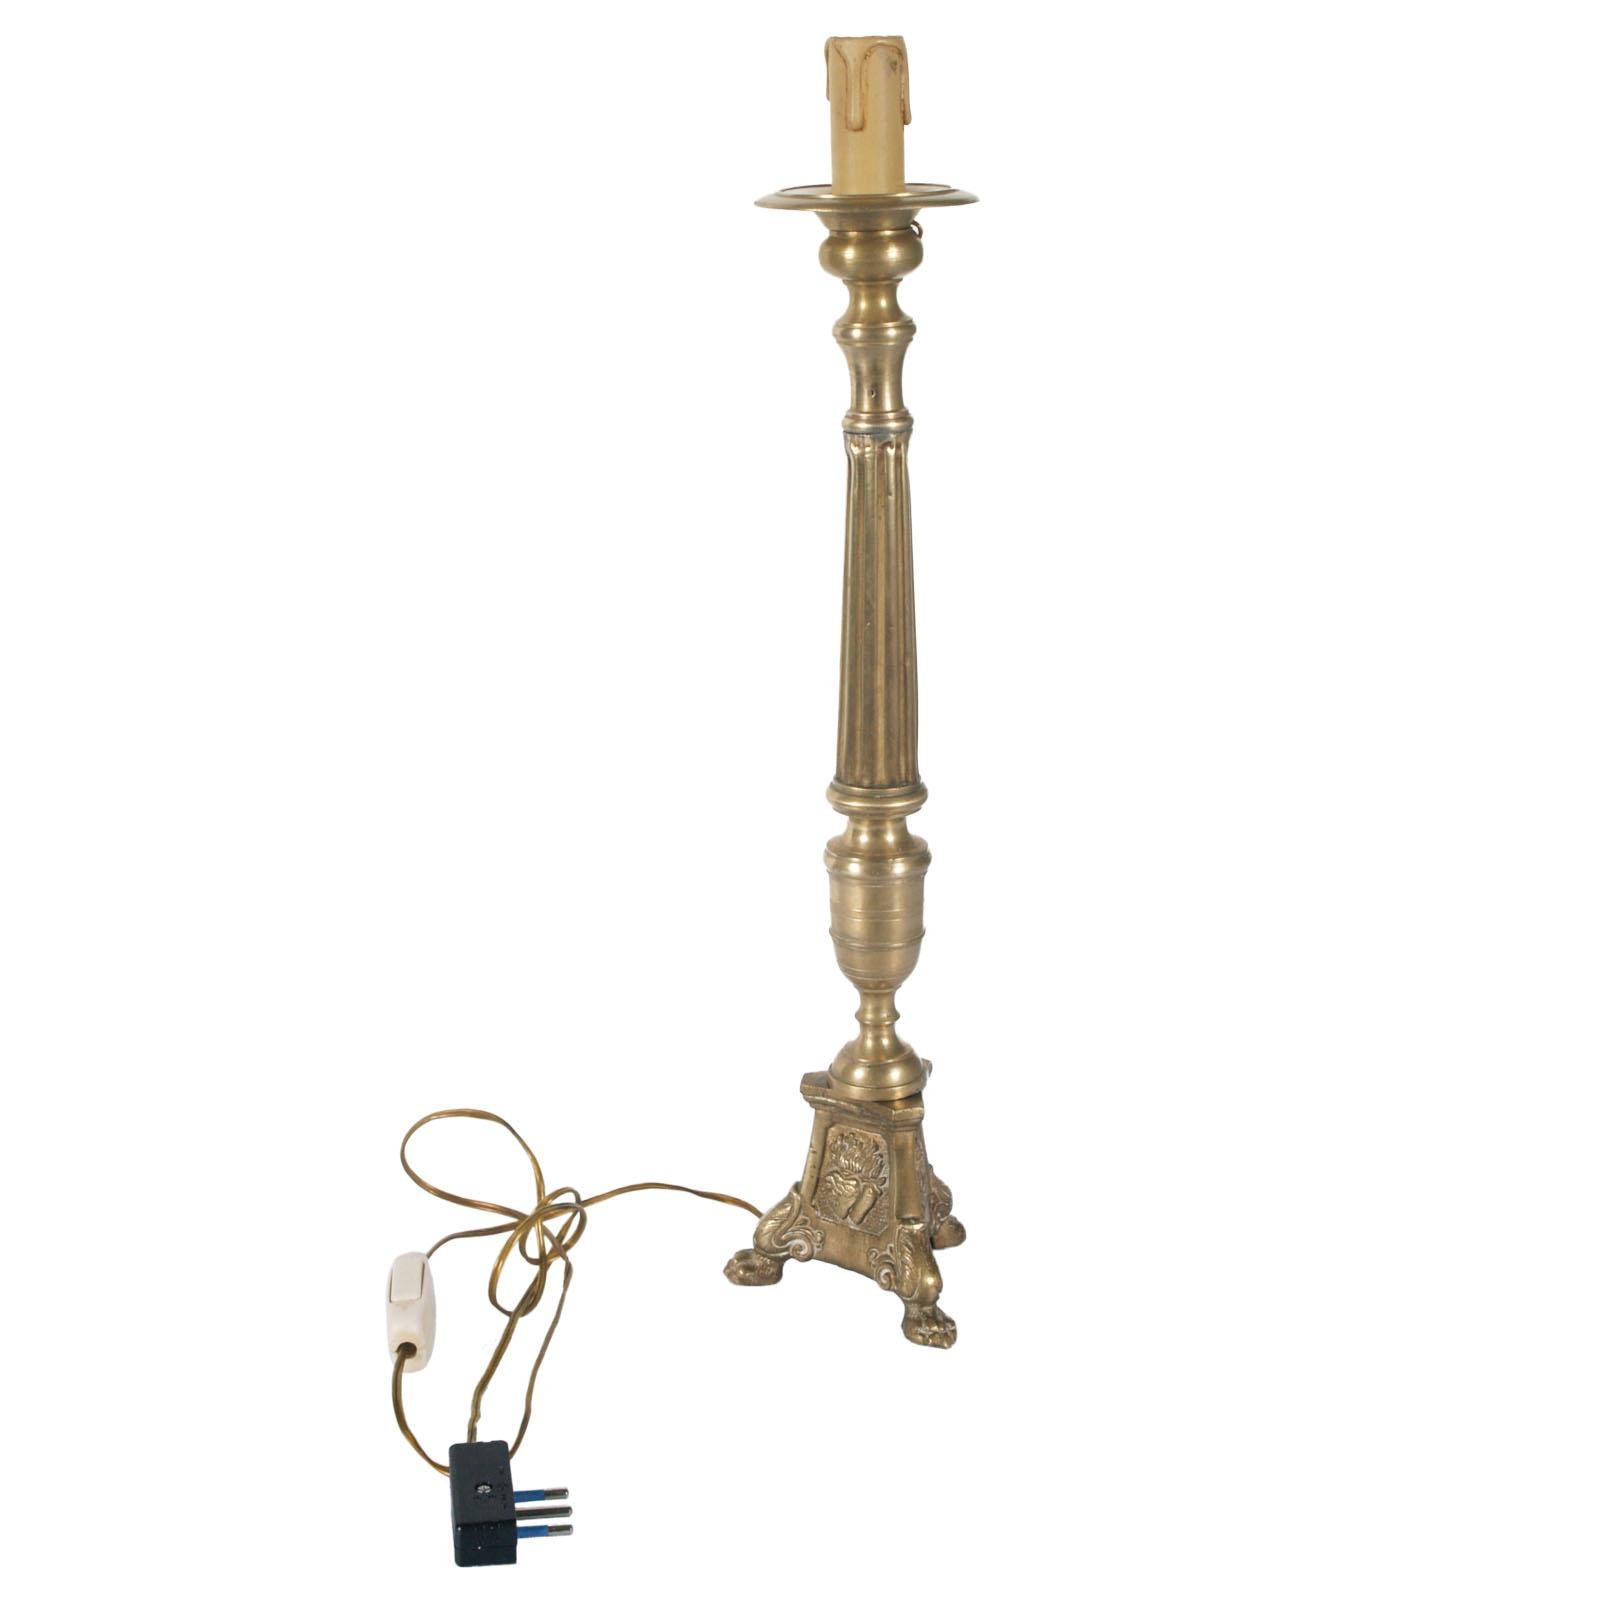 Heavy and massive 17th century antique lampholder candelabrum in gilt bronze with tripod stand
Tripod stand decorated with image of Christ, Madonna and Sacred Heart
Measures in cm : H 50 (tripod diameter cm 12).